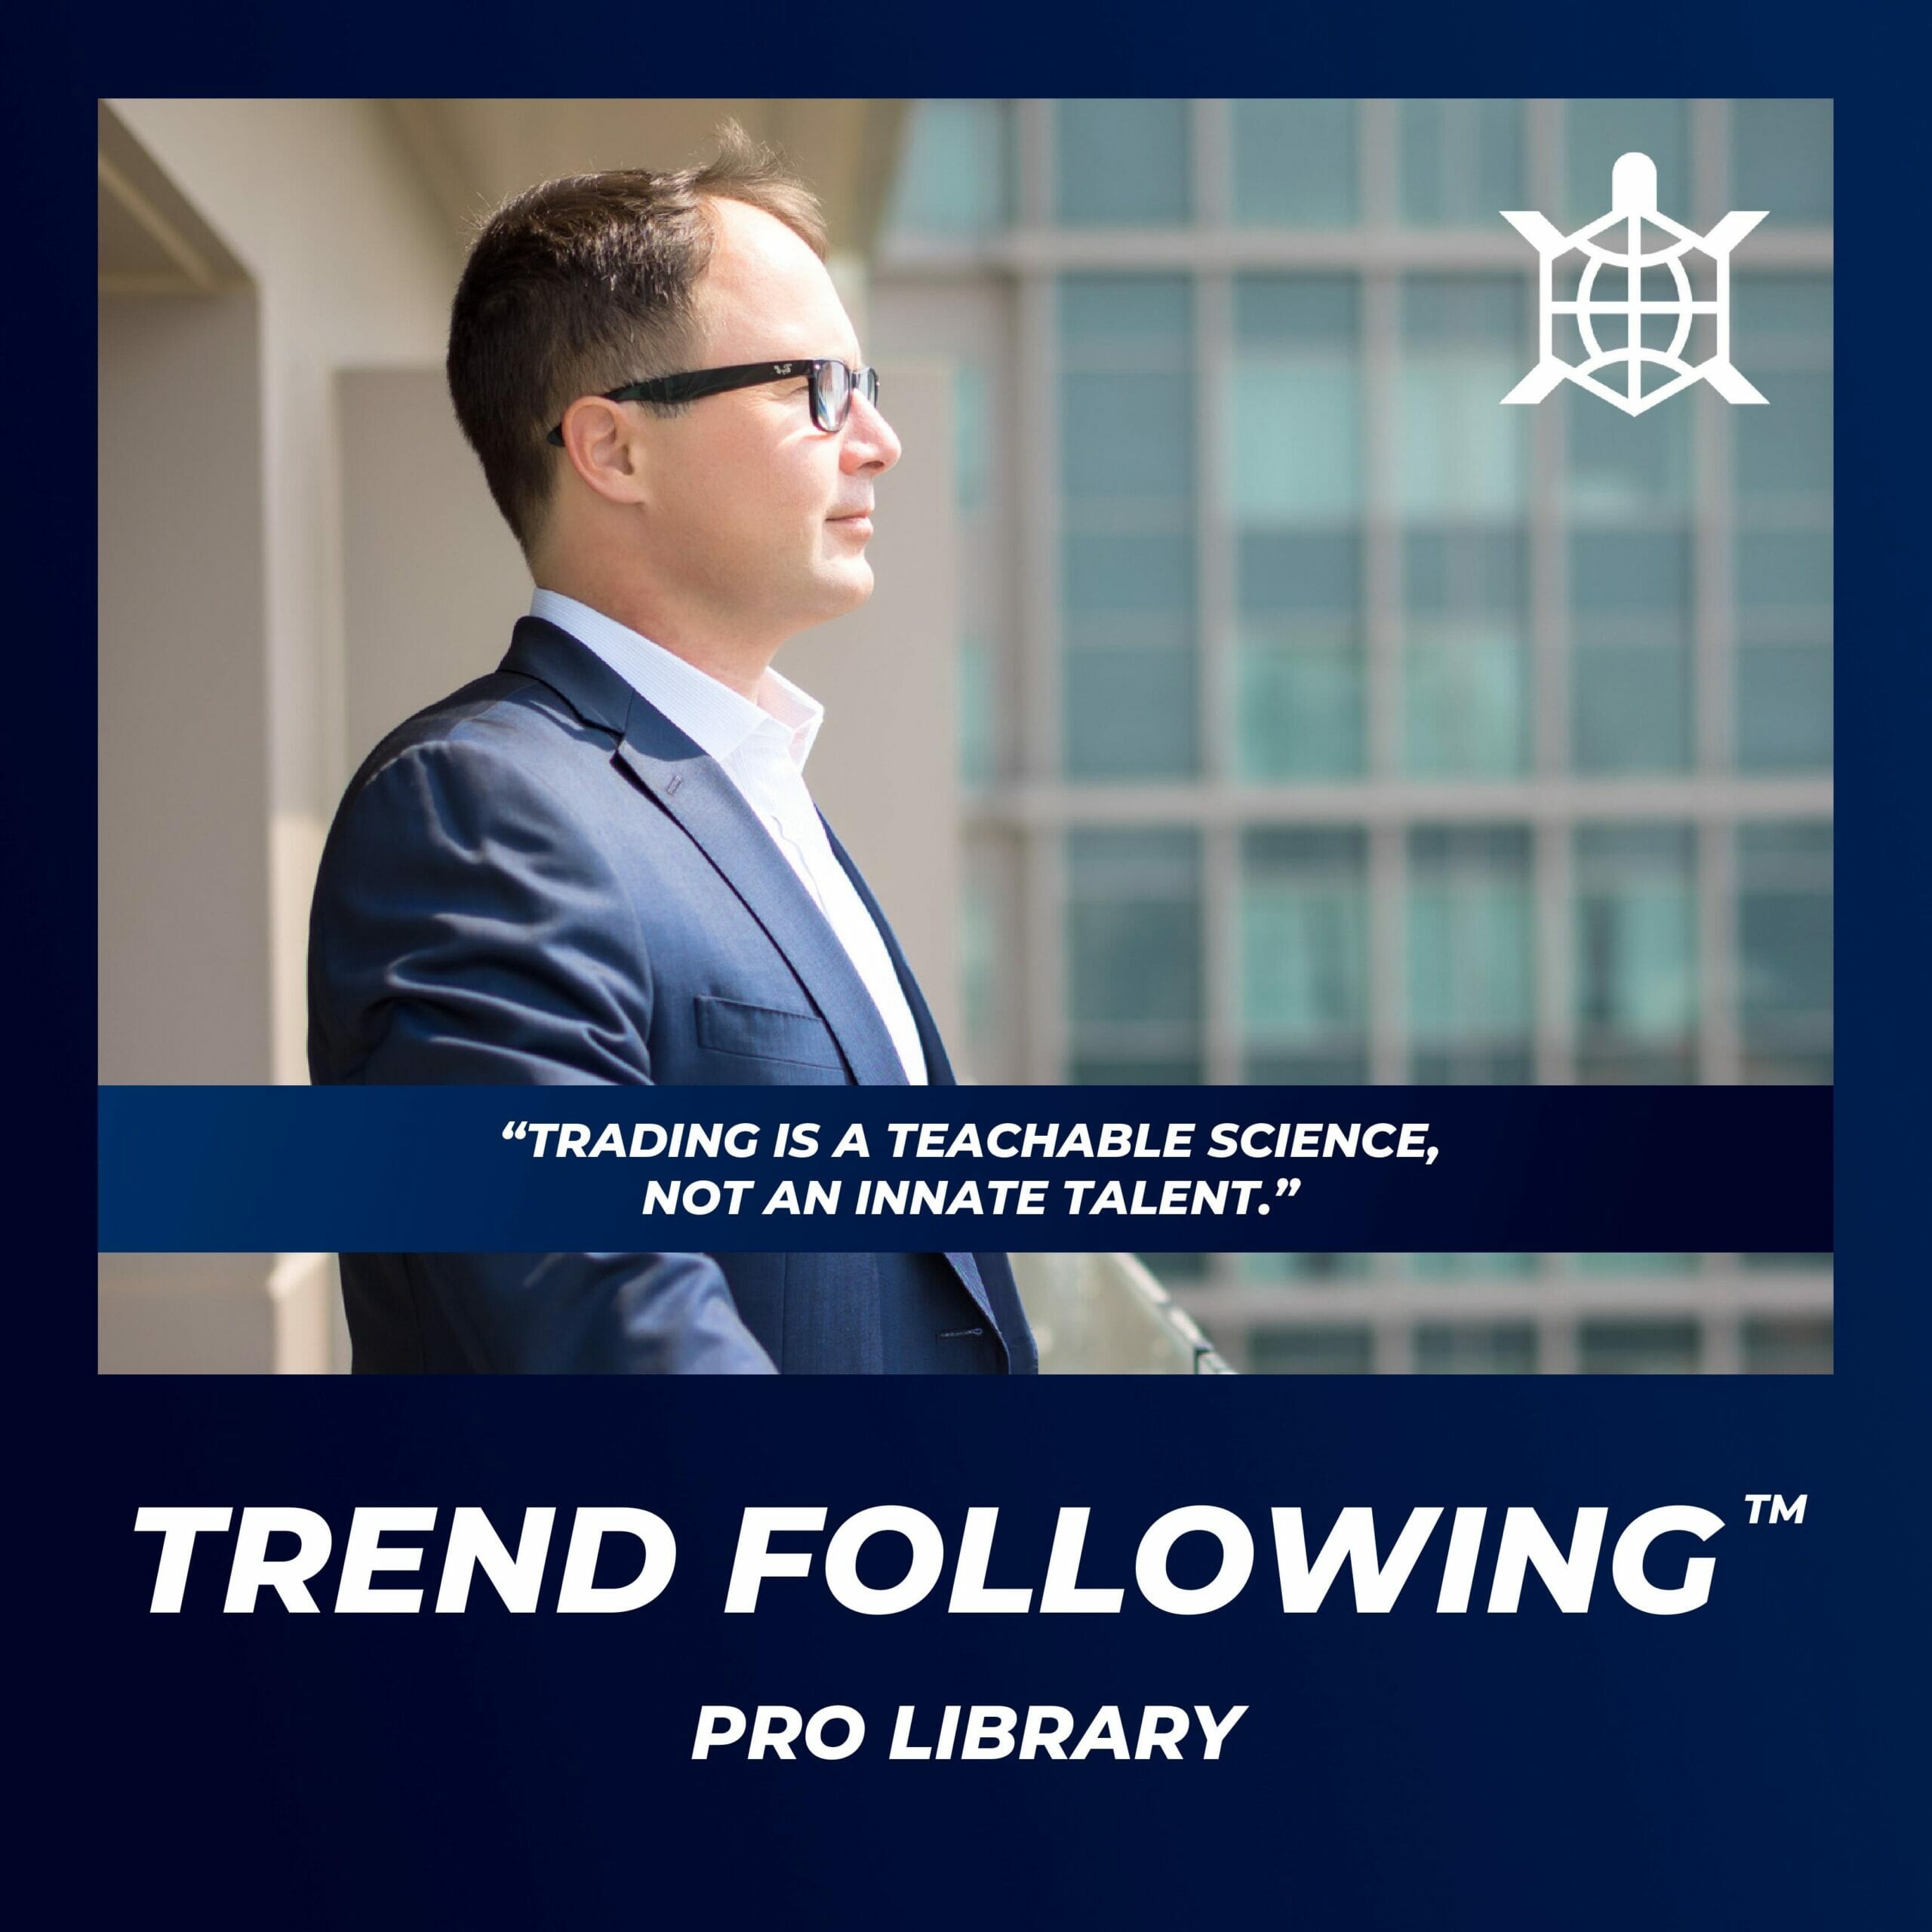 Trend Following™ Pro Library